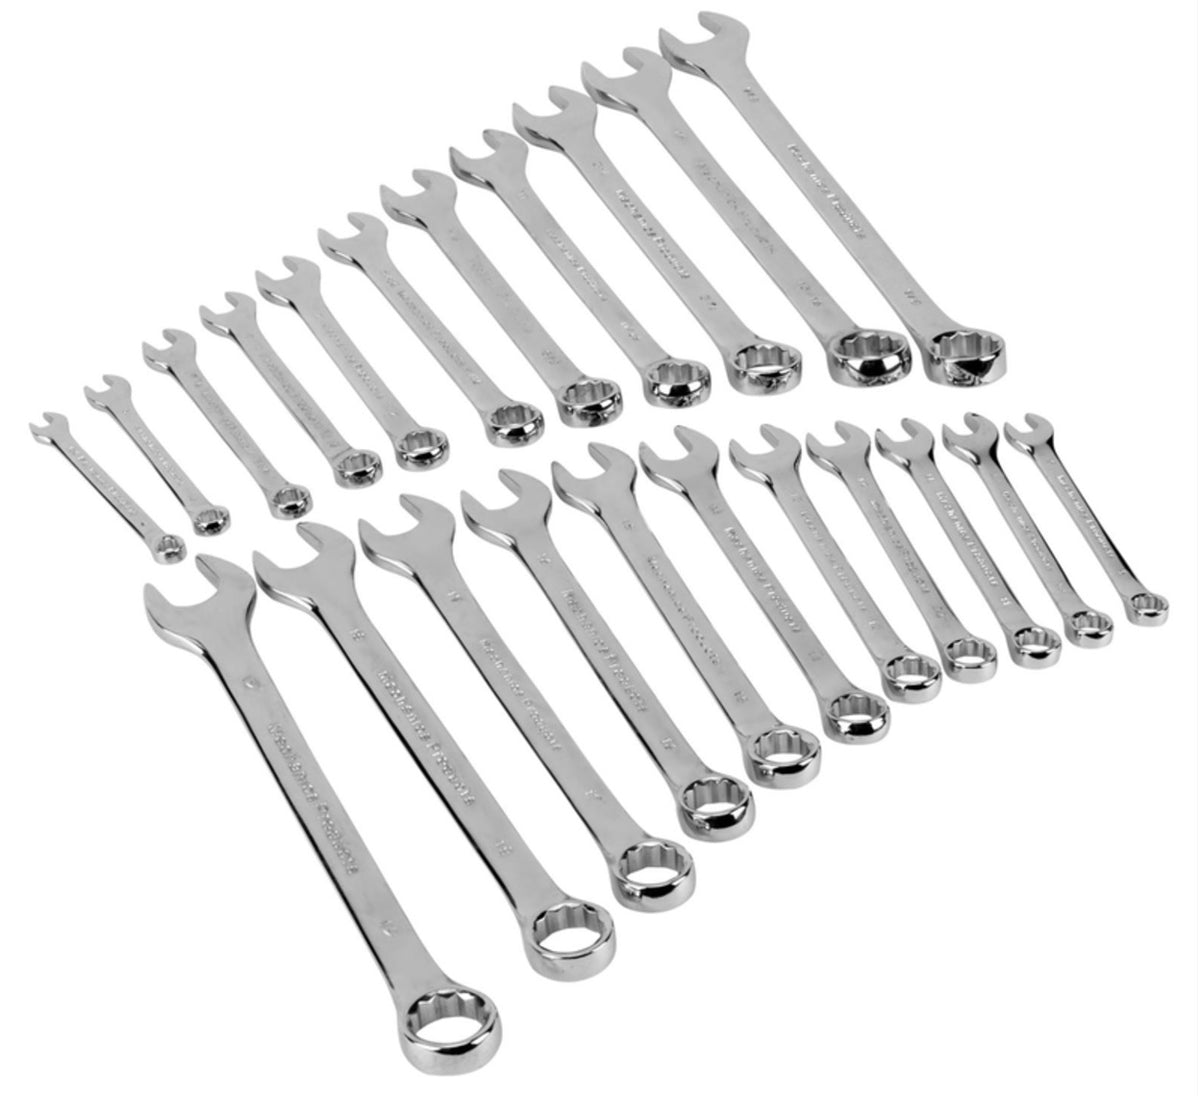 Performance Tool W1069 Metric & SAE Combination Wrench Set, Silver